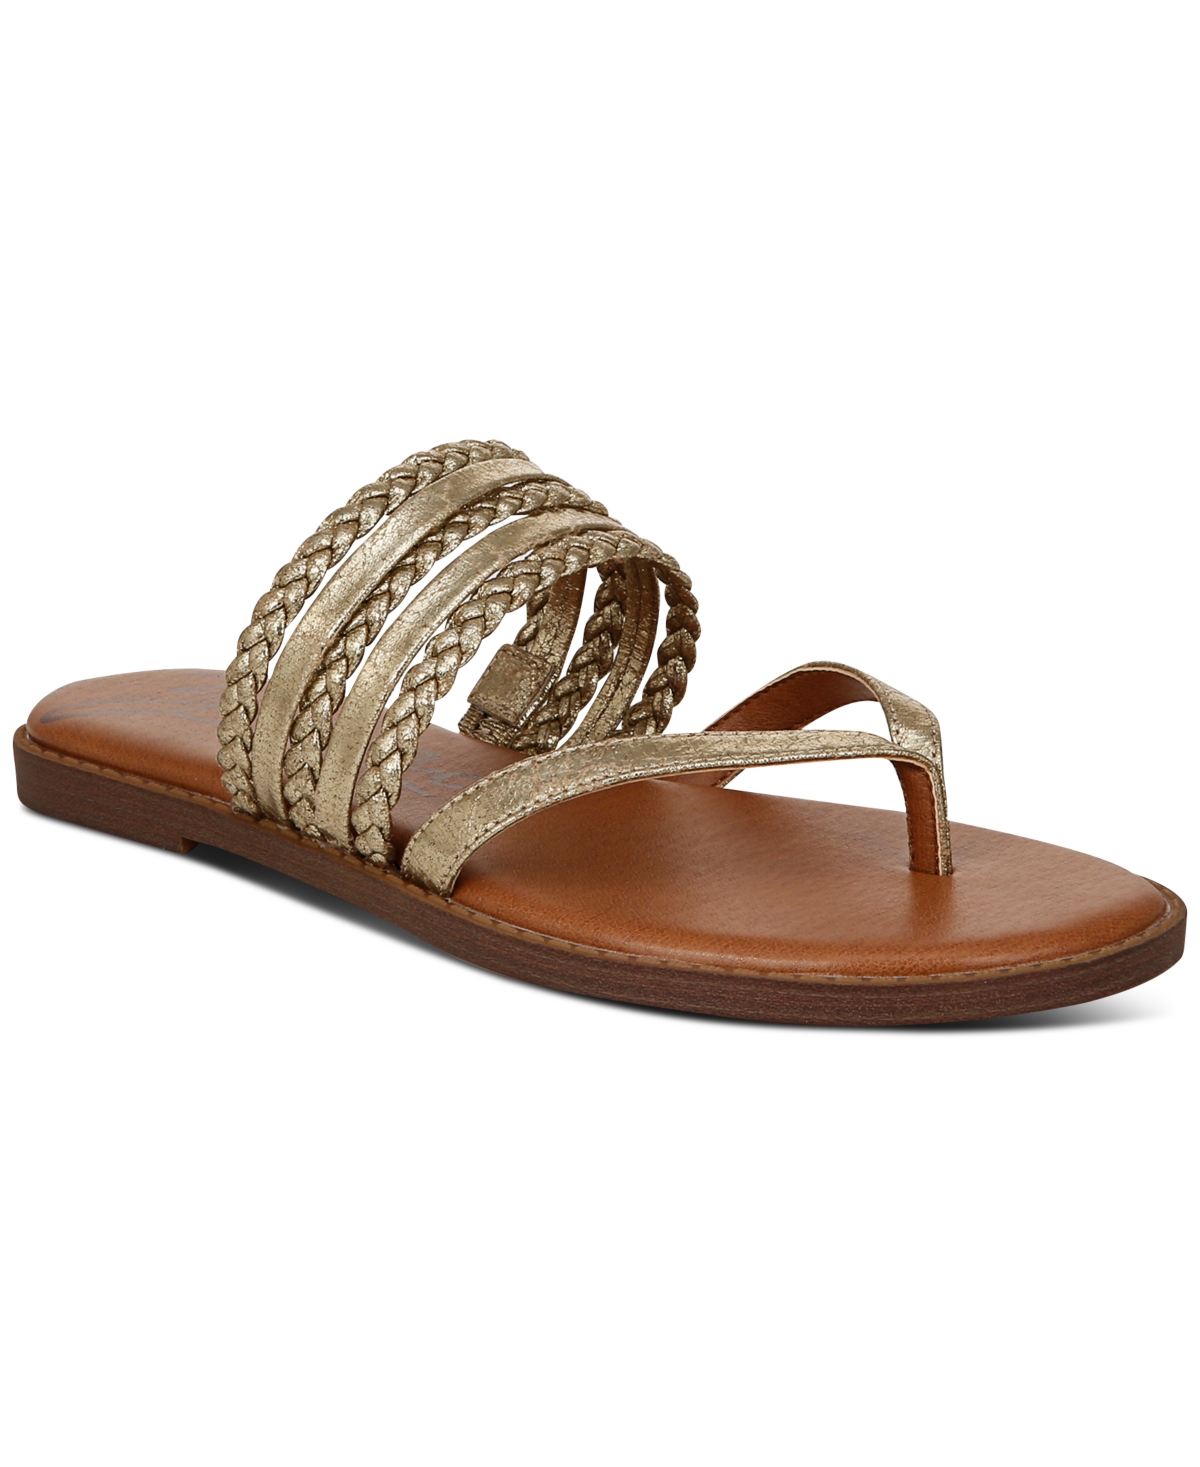 Women's Cary Braided Strappy Thong Flip Flop Slide Sandals - Gold Metallic